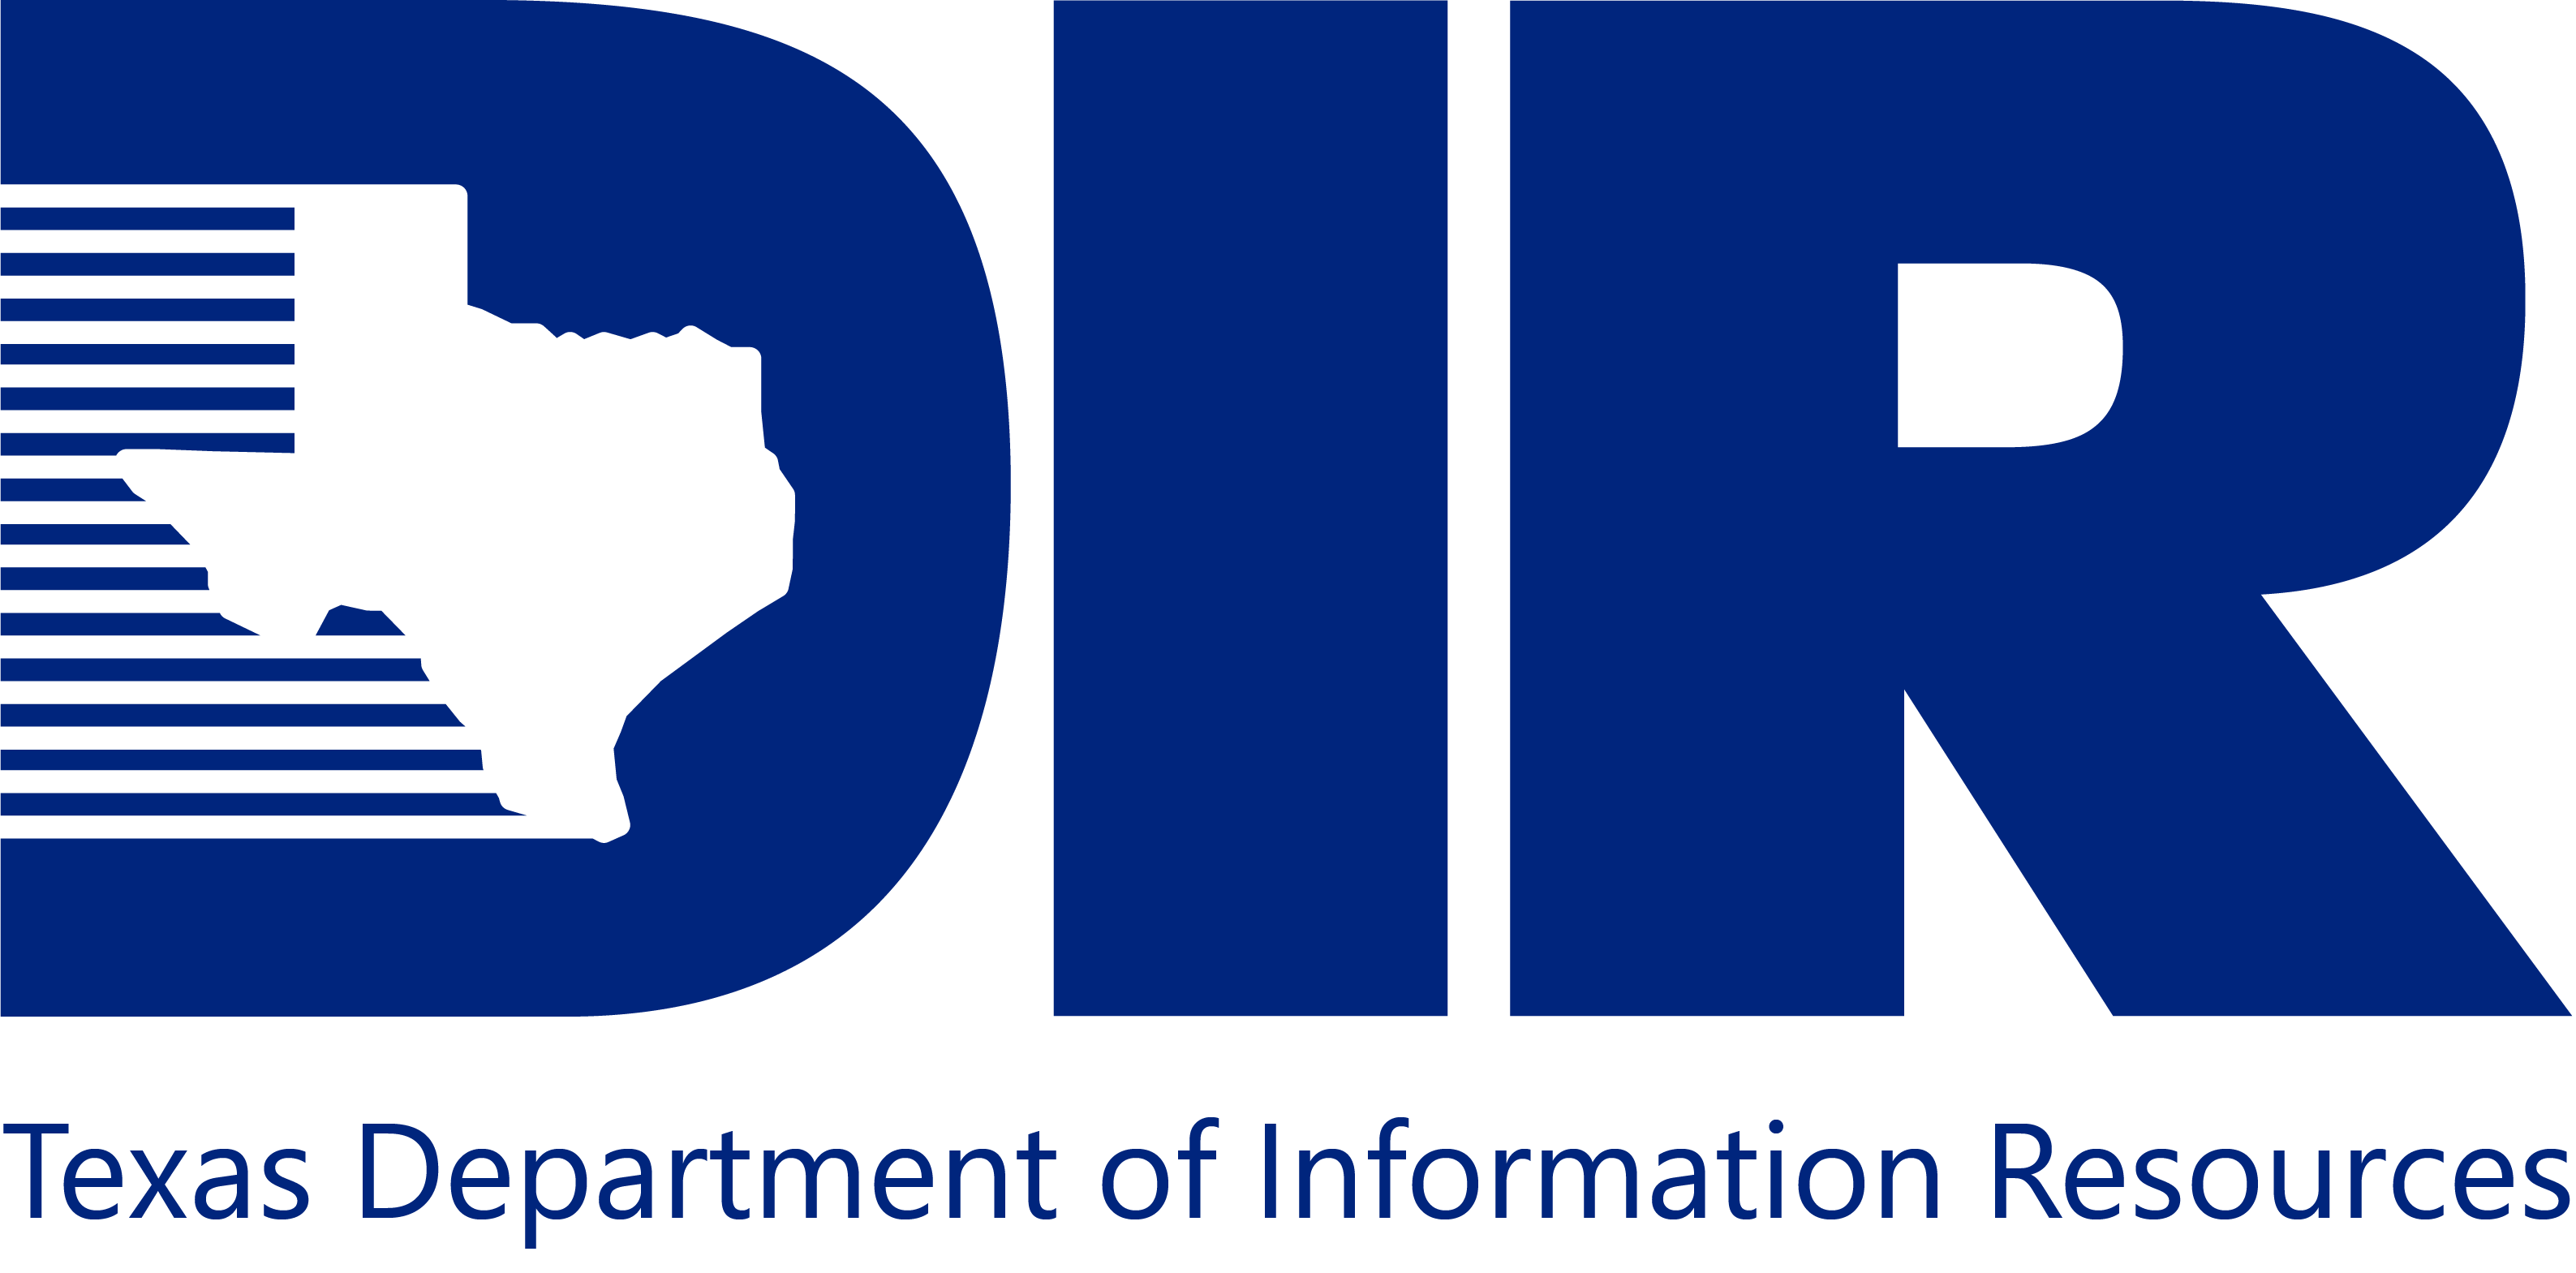 Image of the Texas Department of Information Resources logo